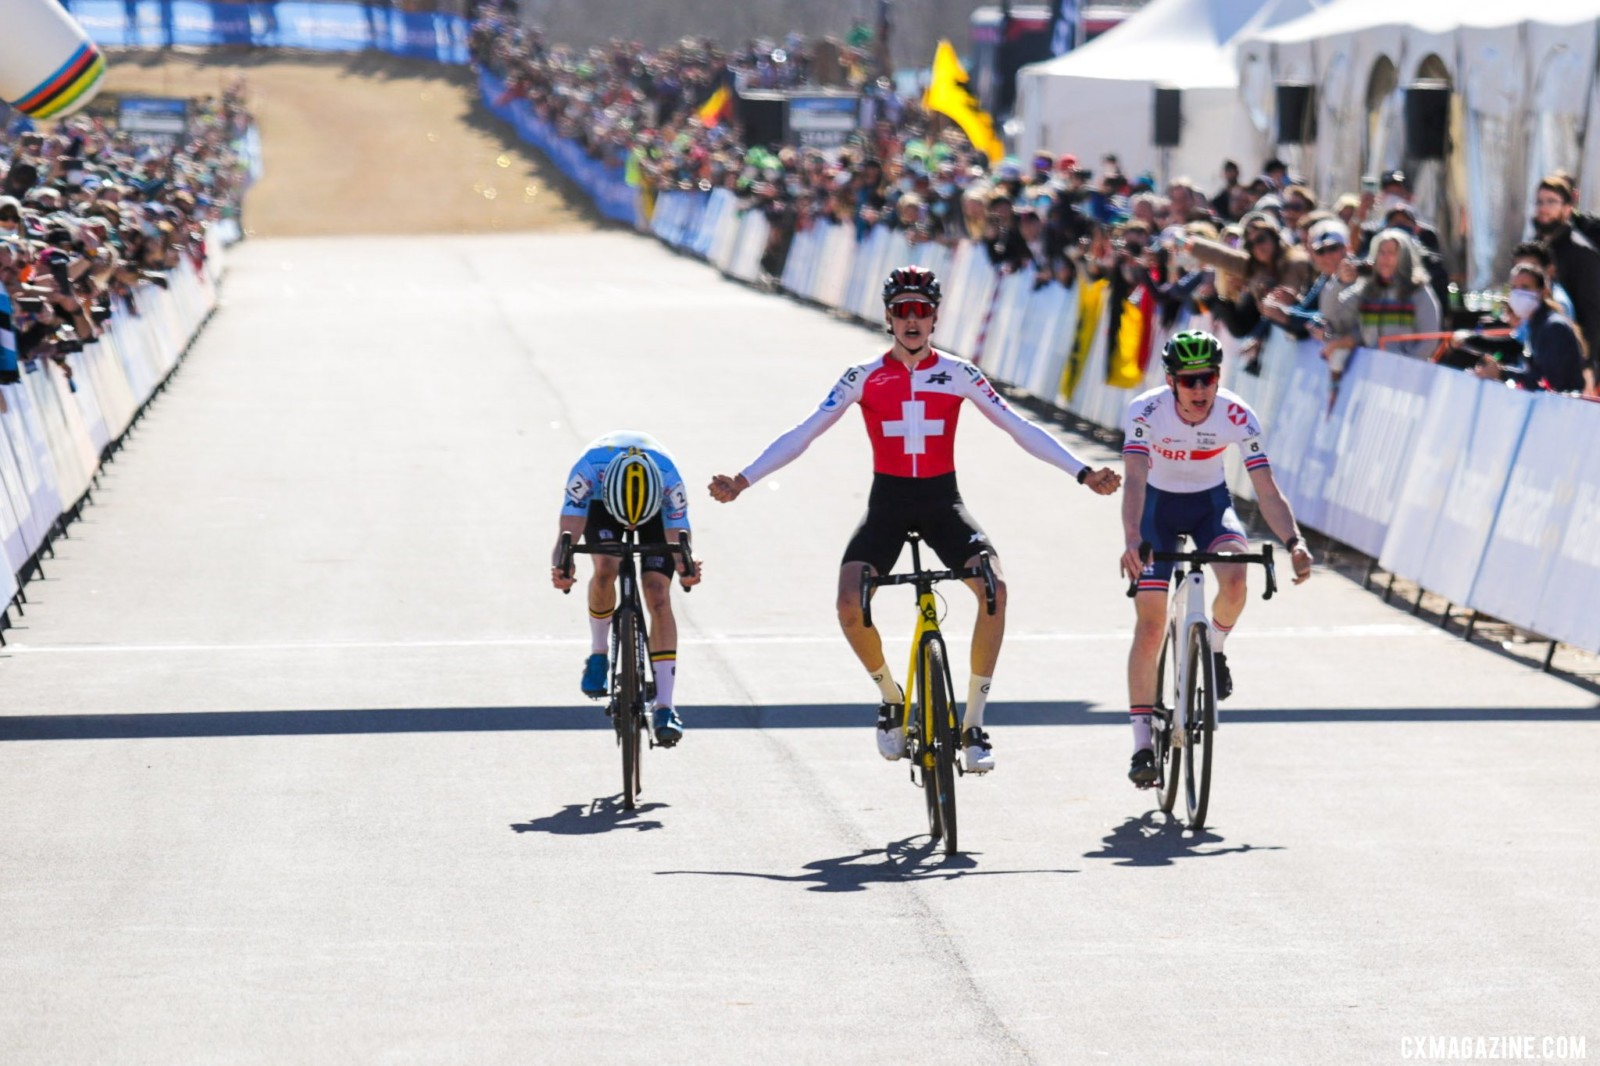 Chrstien outsprints Dockx and Smith to win the Junior Men's title. 2022 Cyclocross World Championships, Fayetteville, Arkansas USA. © D. Mable / Cyclocross Magazine